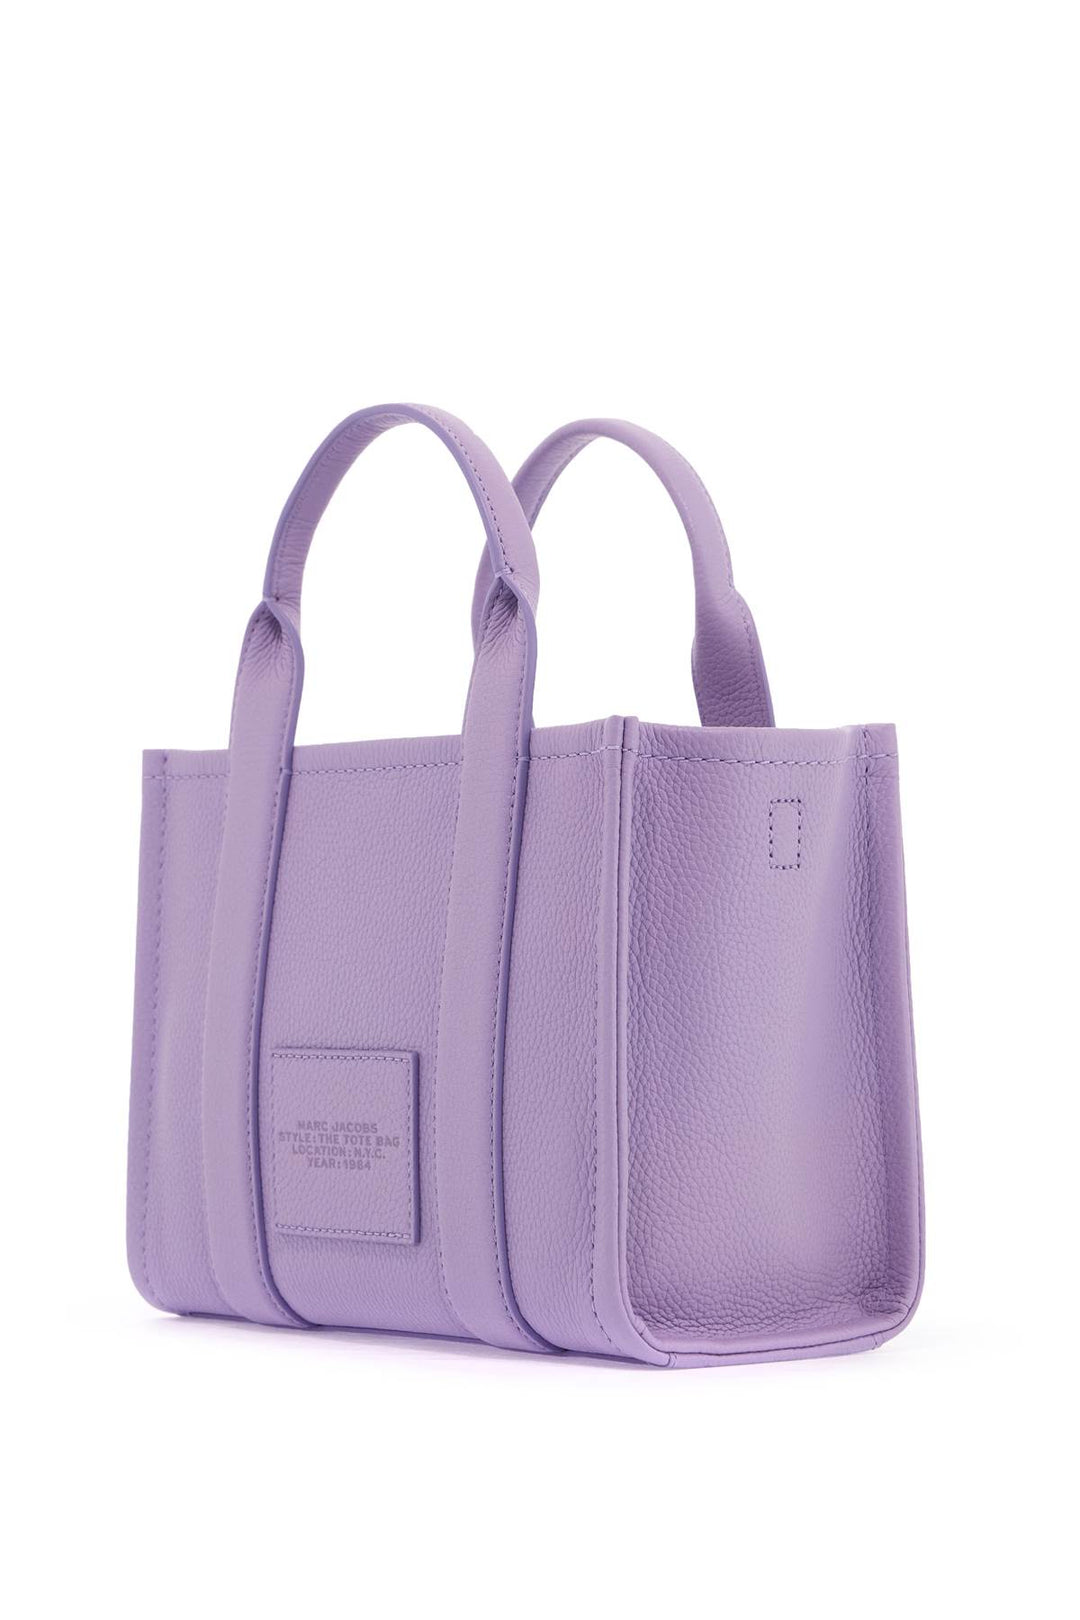 Marc Jacobs The Leather Small Tote Bag   Purple